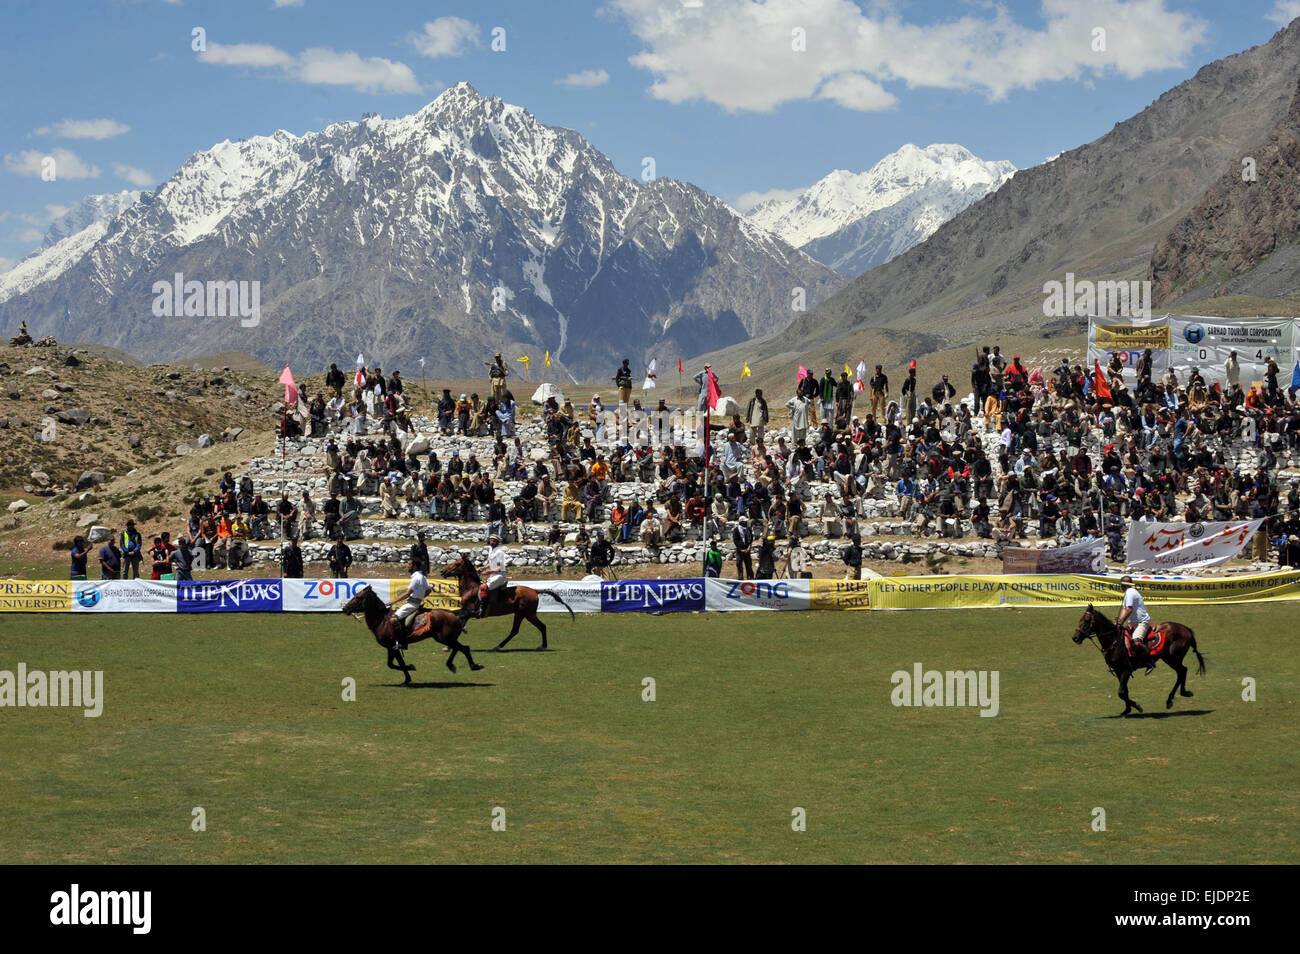 Rival polo teams from Chitral and Gilgit compete during the worlds highest polo match on the Shandur Pass, Chitral, Pakistan. Stock Photo